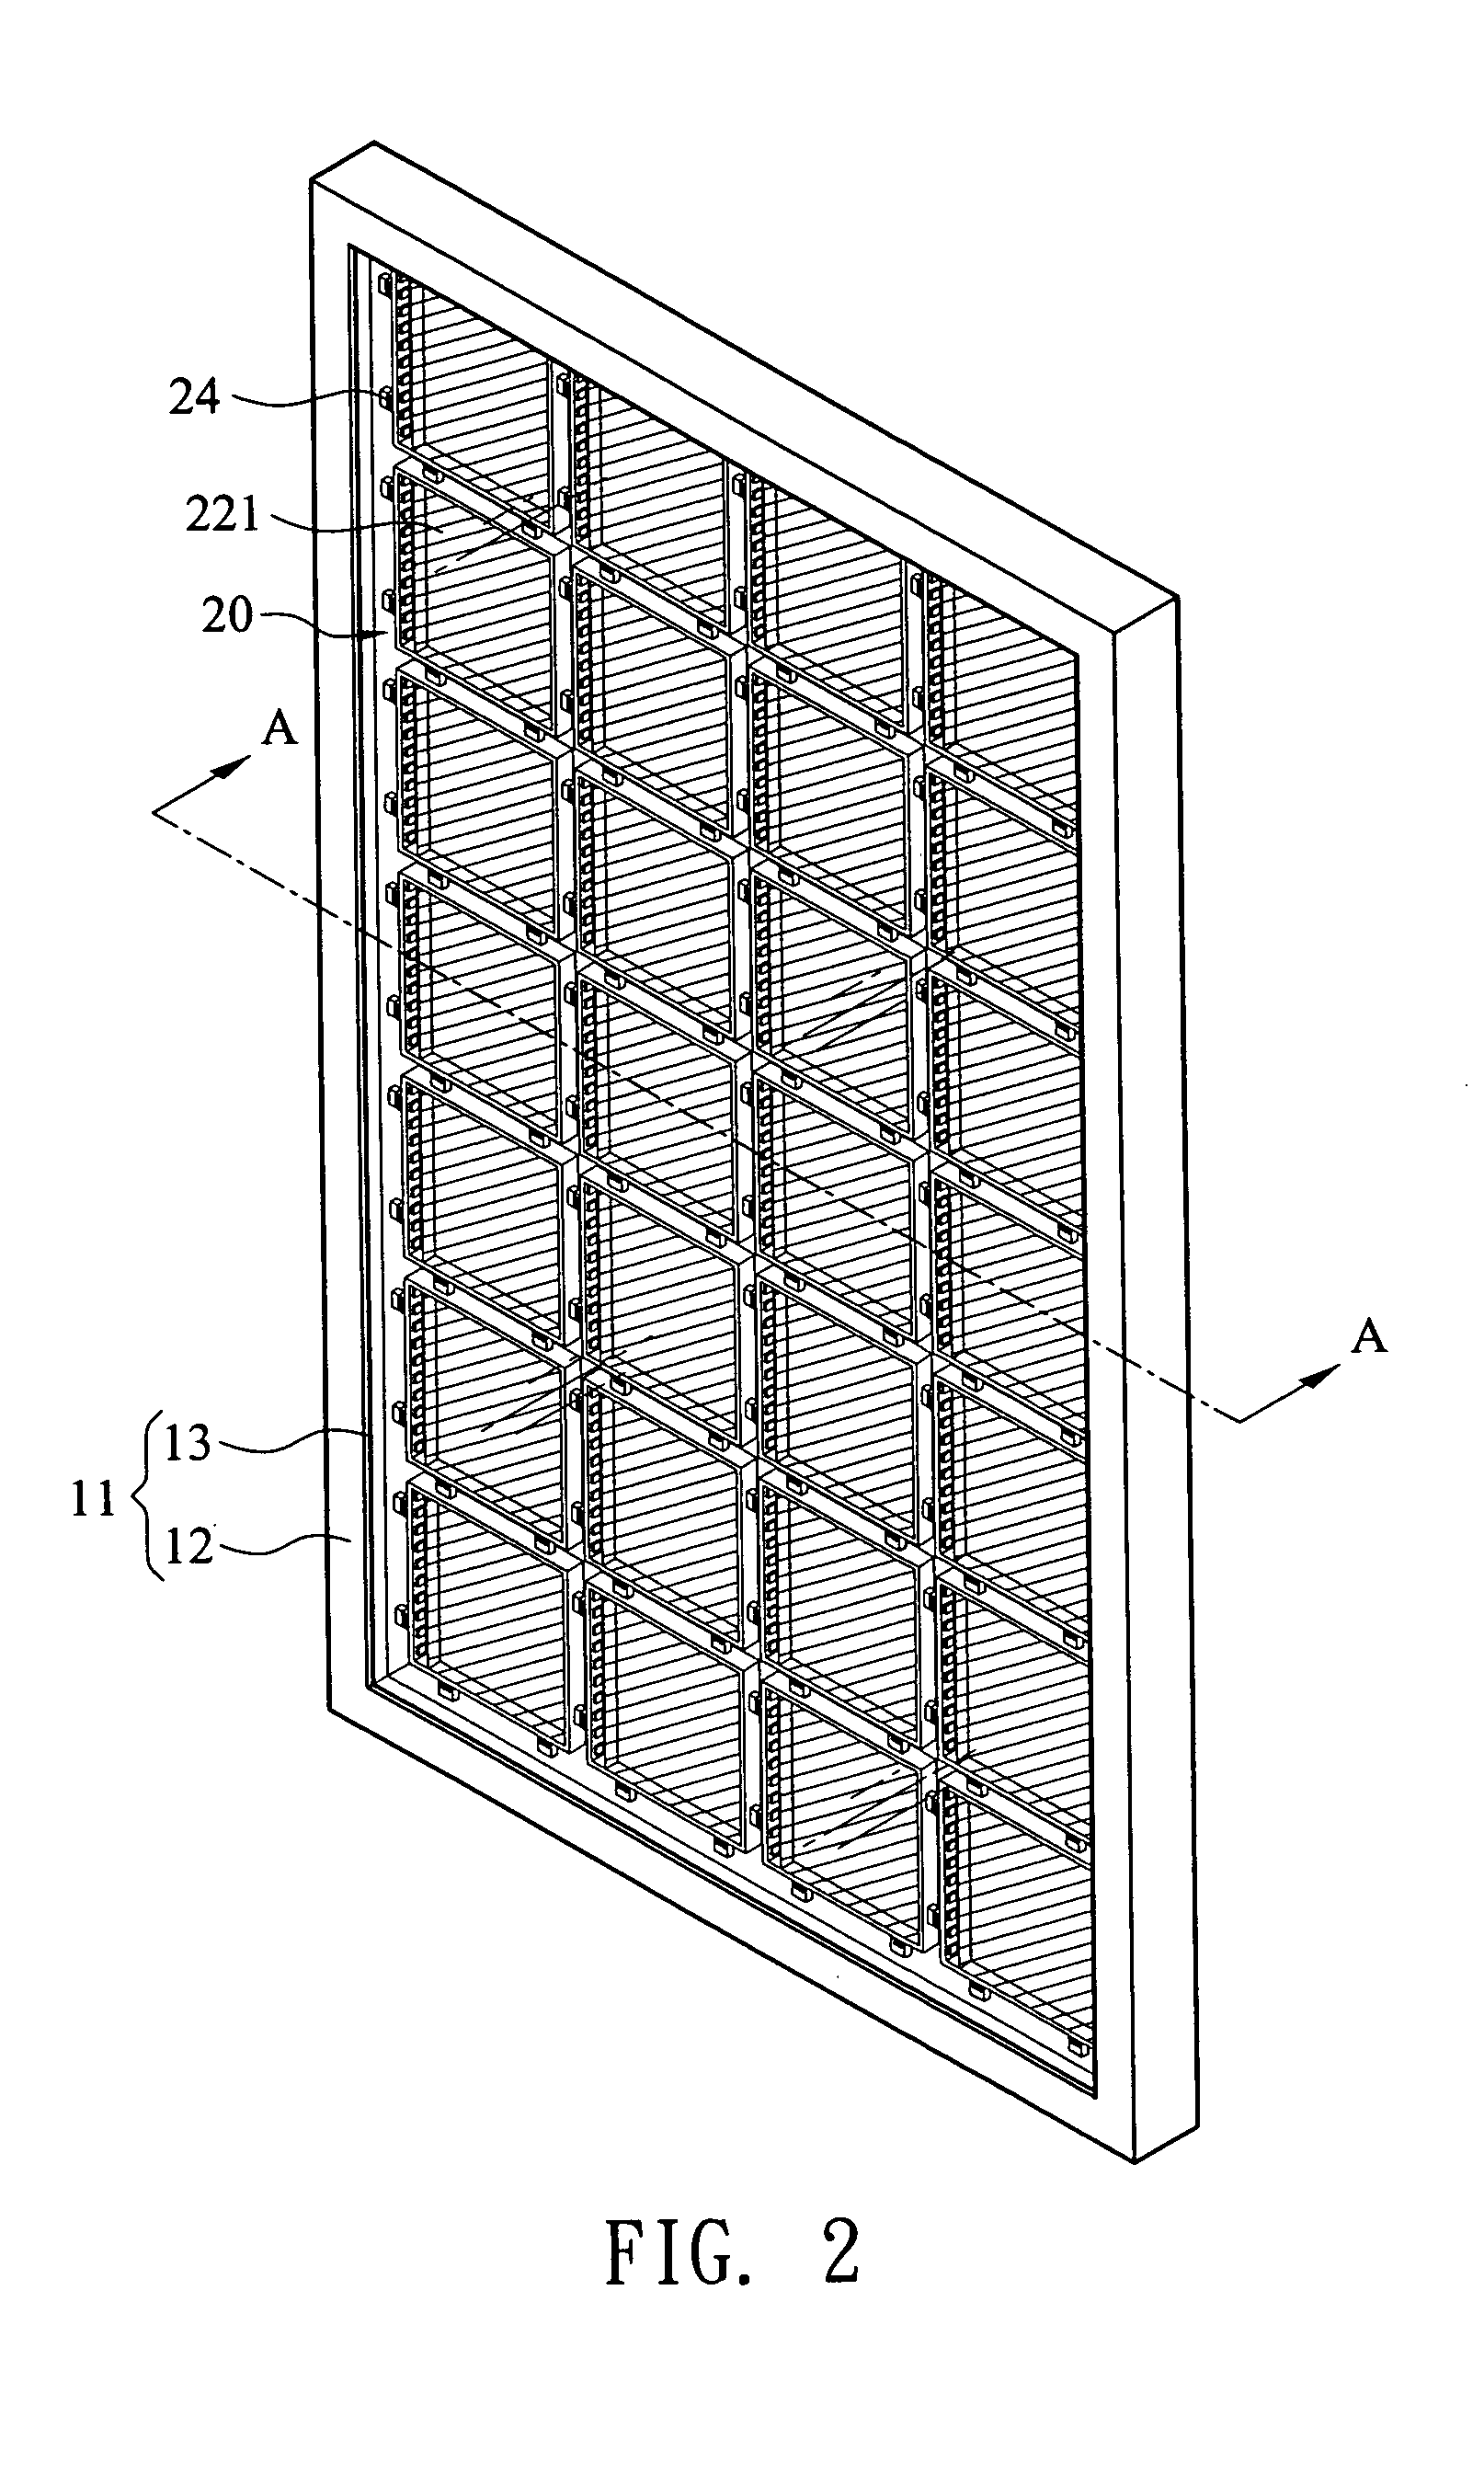 Structure of advertising box having modular lighting device and structure of same modular lighting device